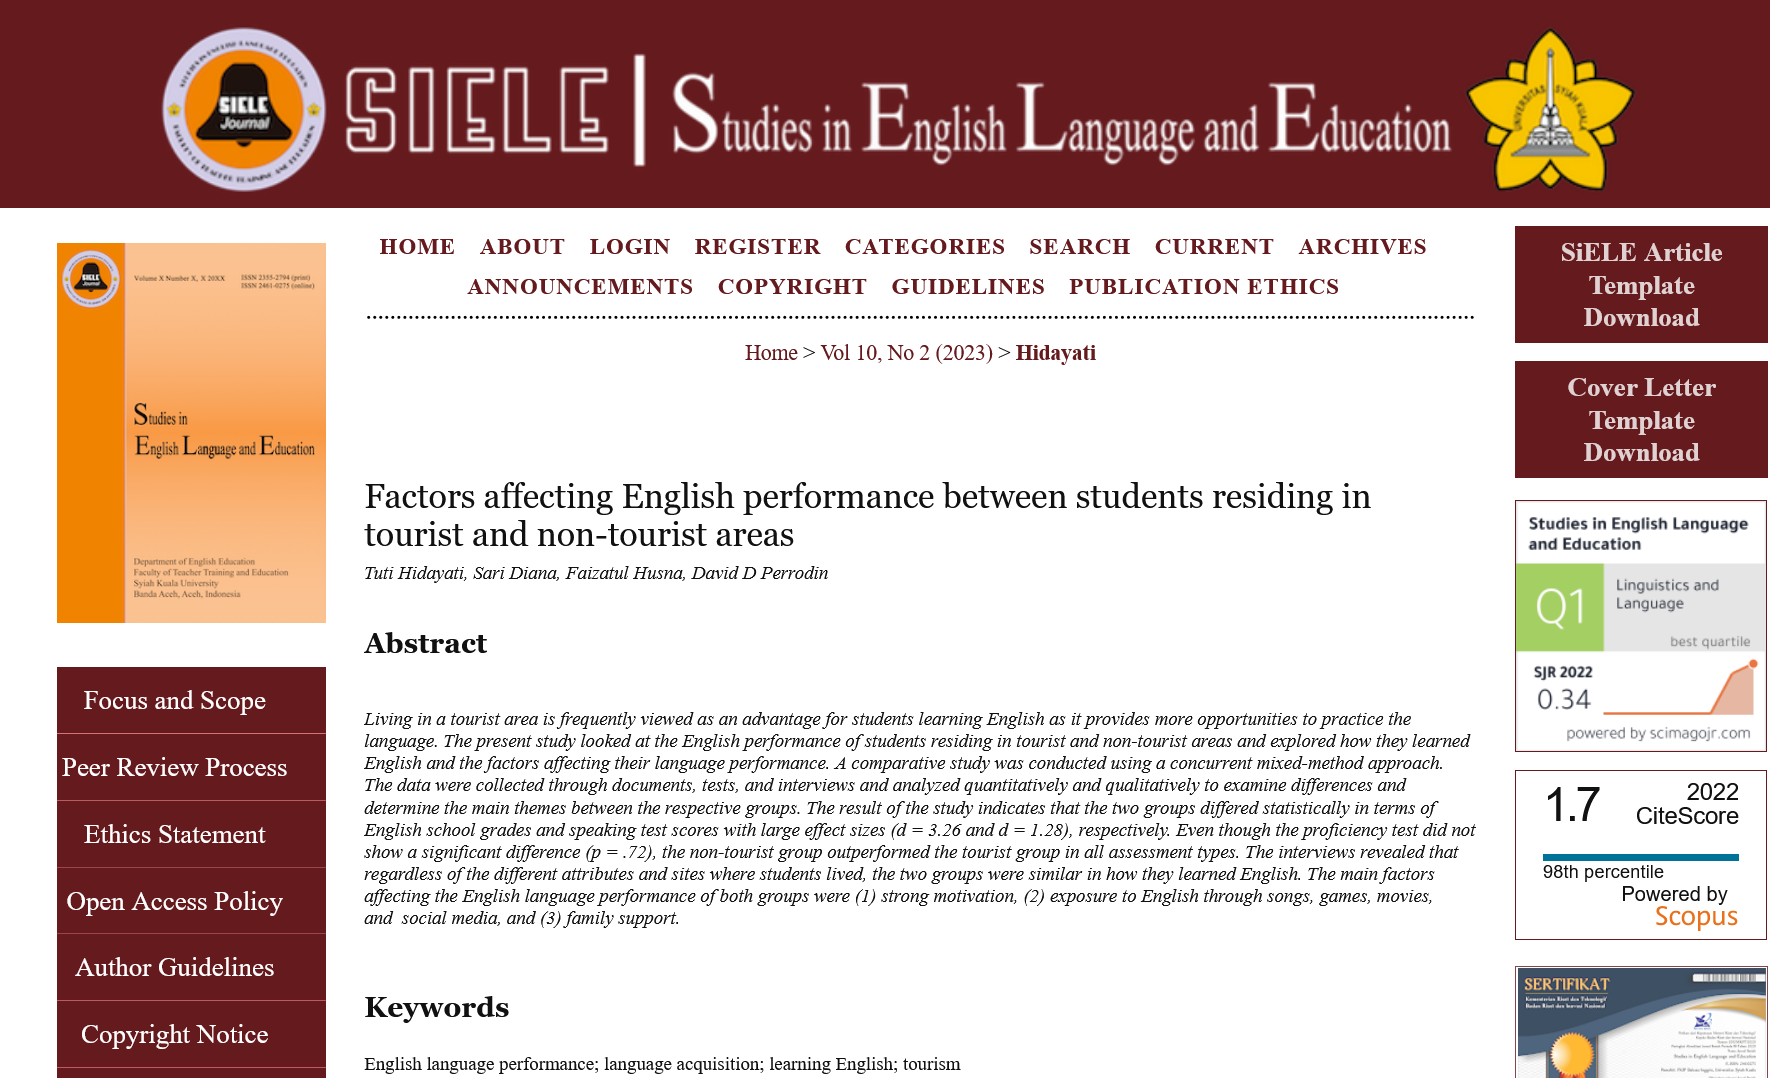 Factors affecting English performance between students residing in tourist and non-tourist areas